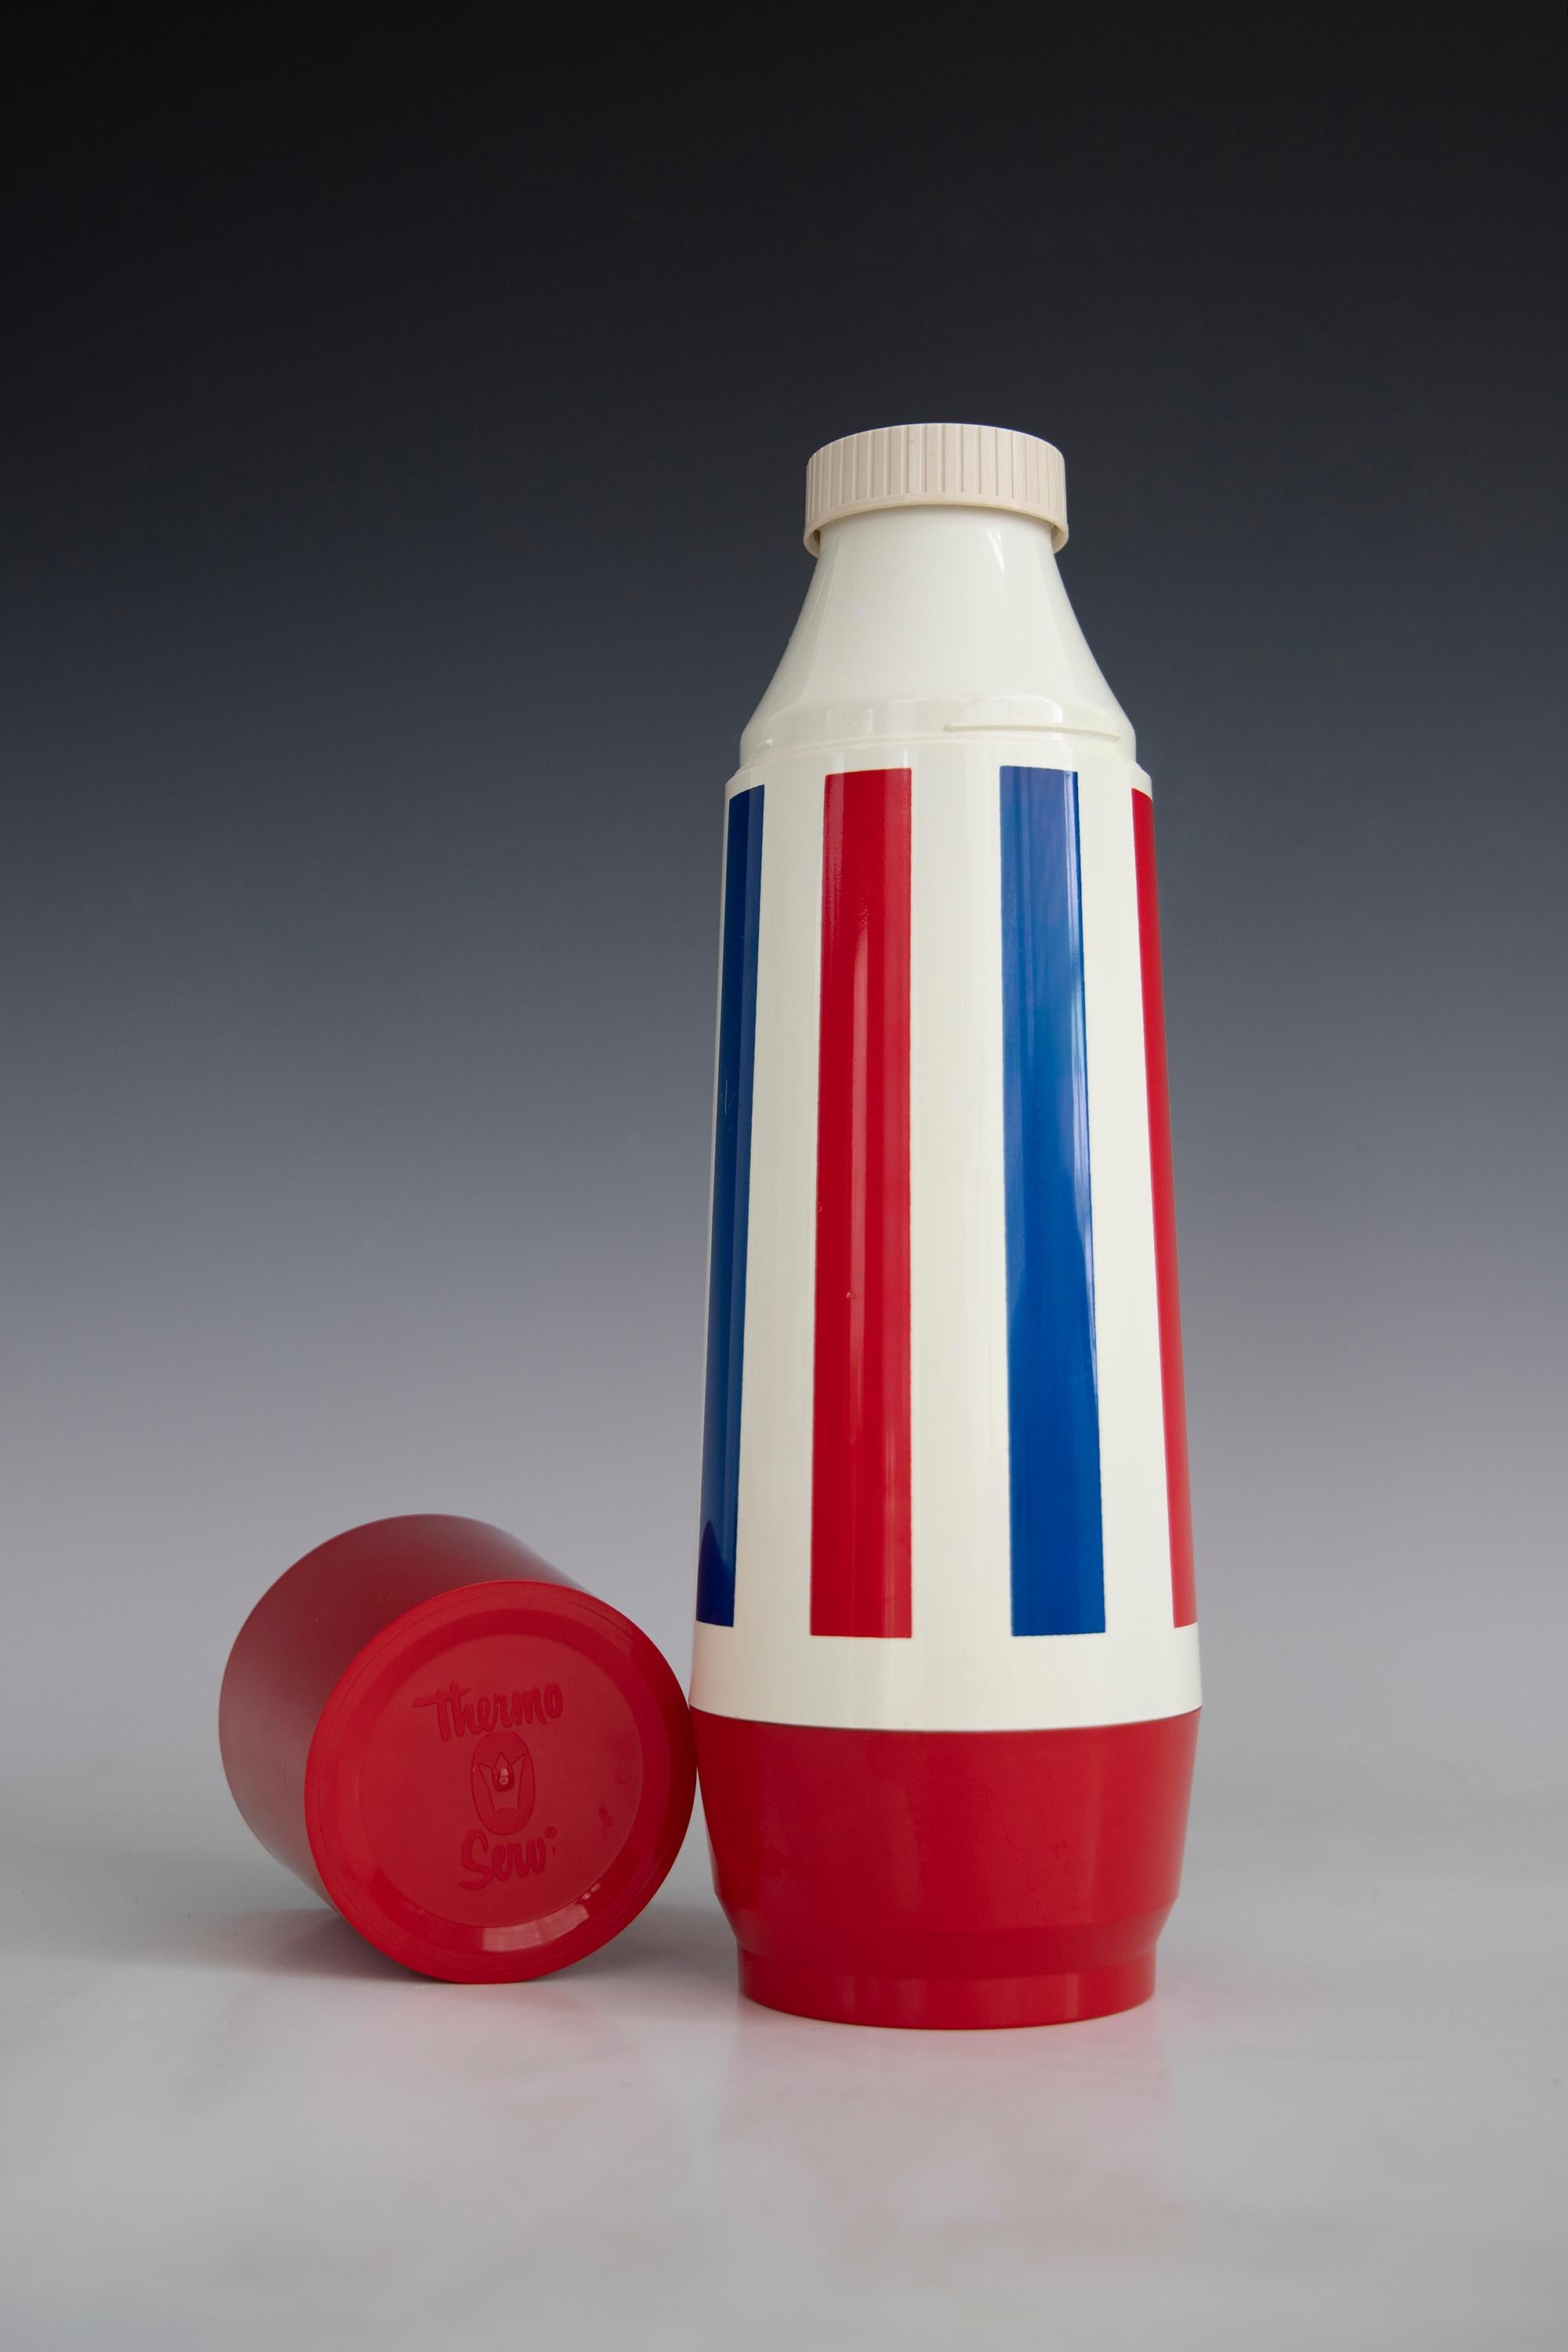 Patriotic themed red white blue Thermo serv Thermos. Really fine condition bright vivid colors.